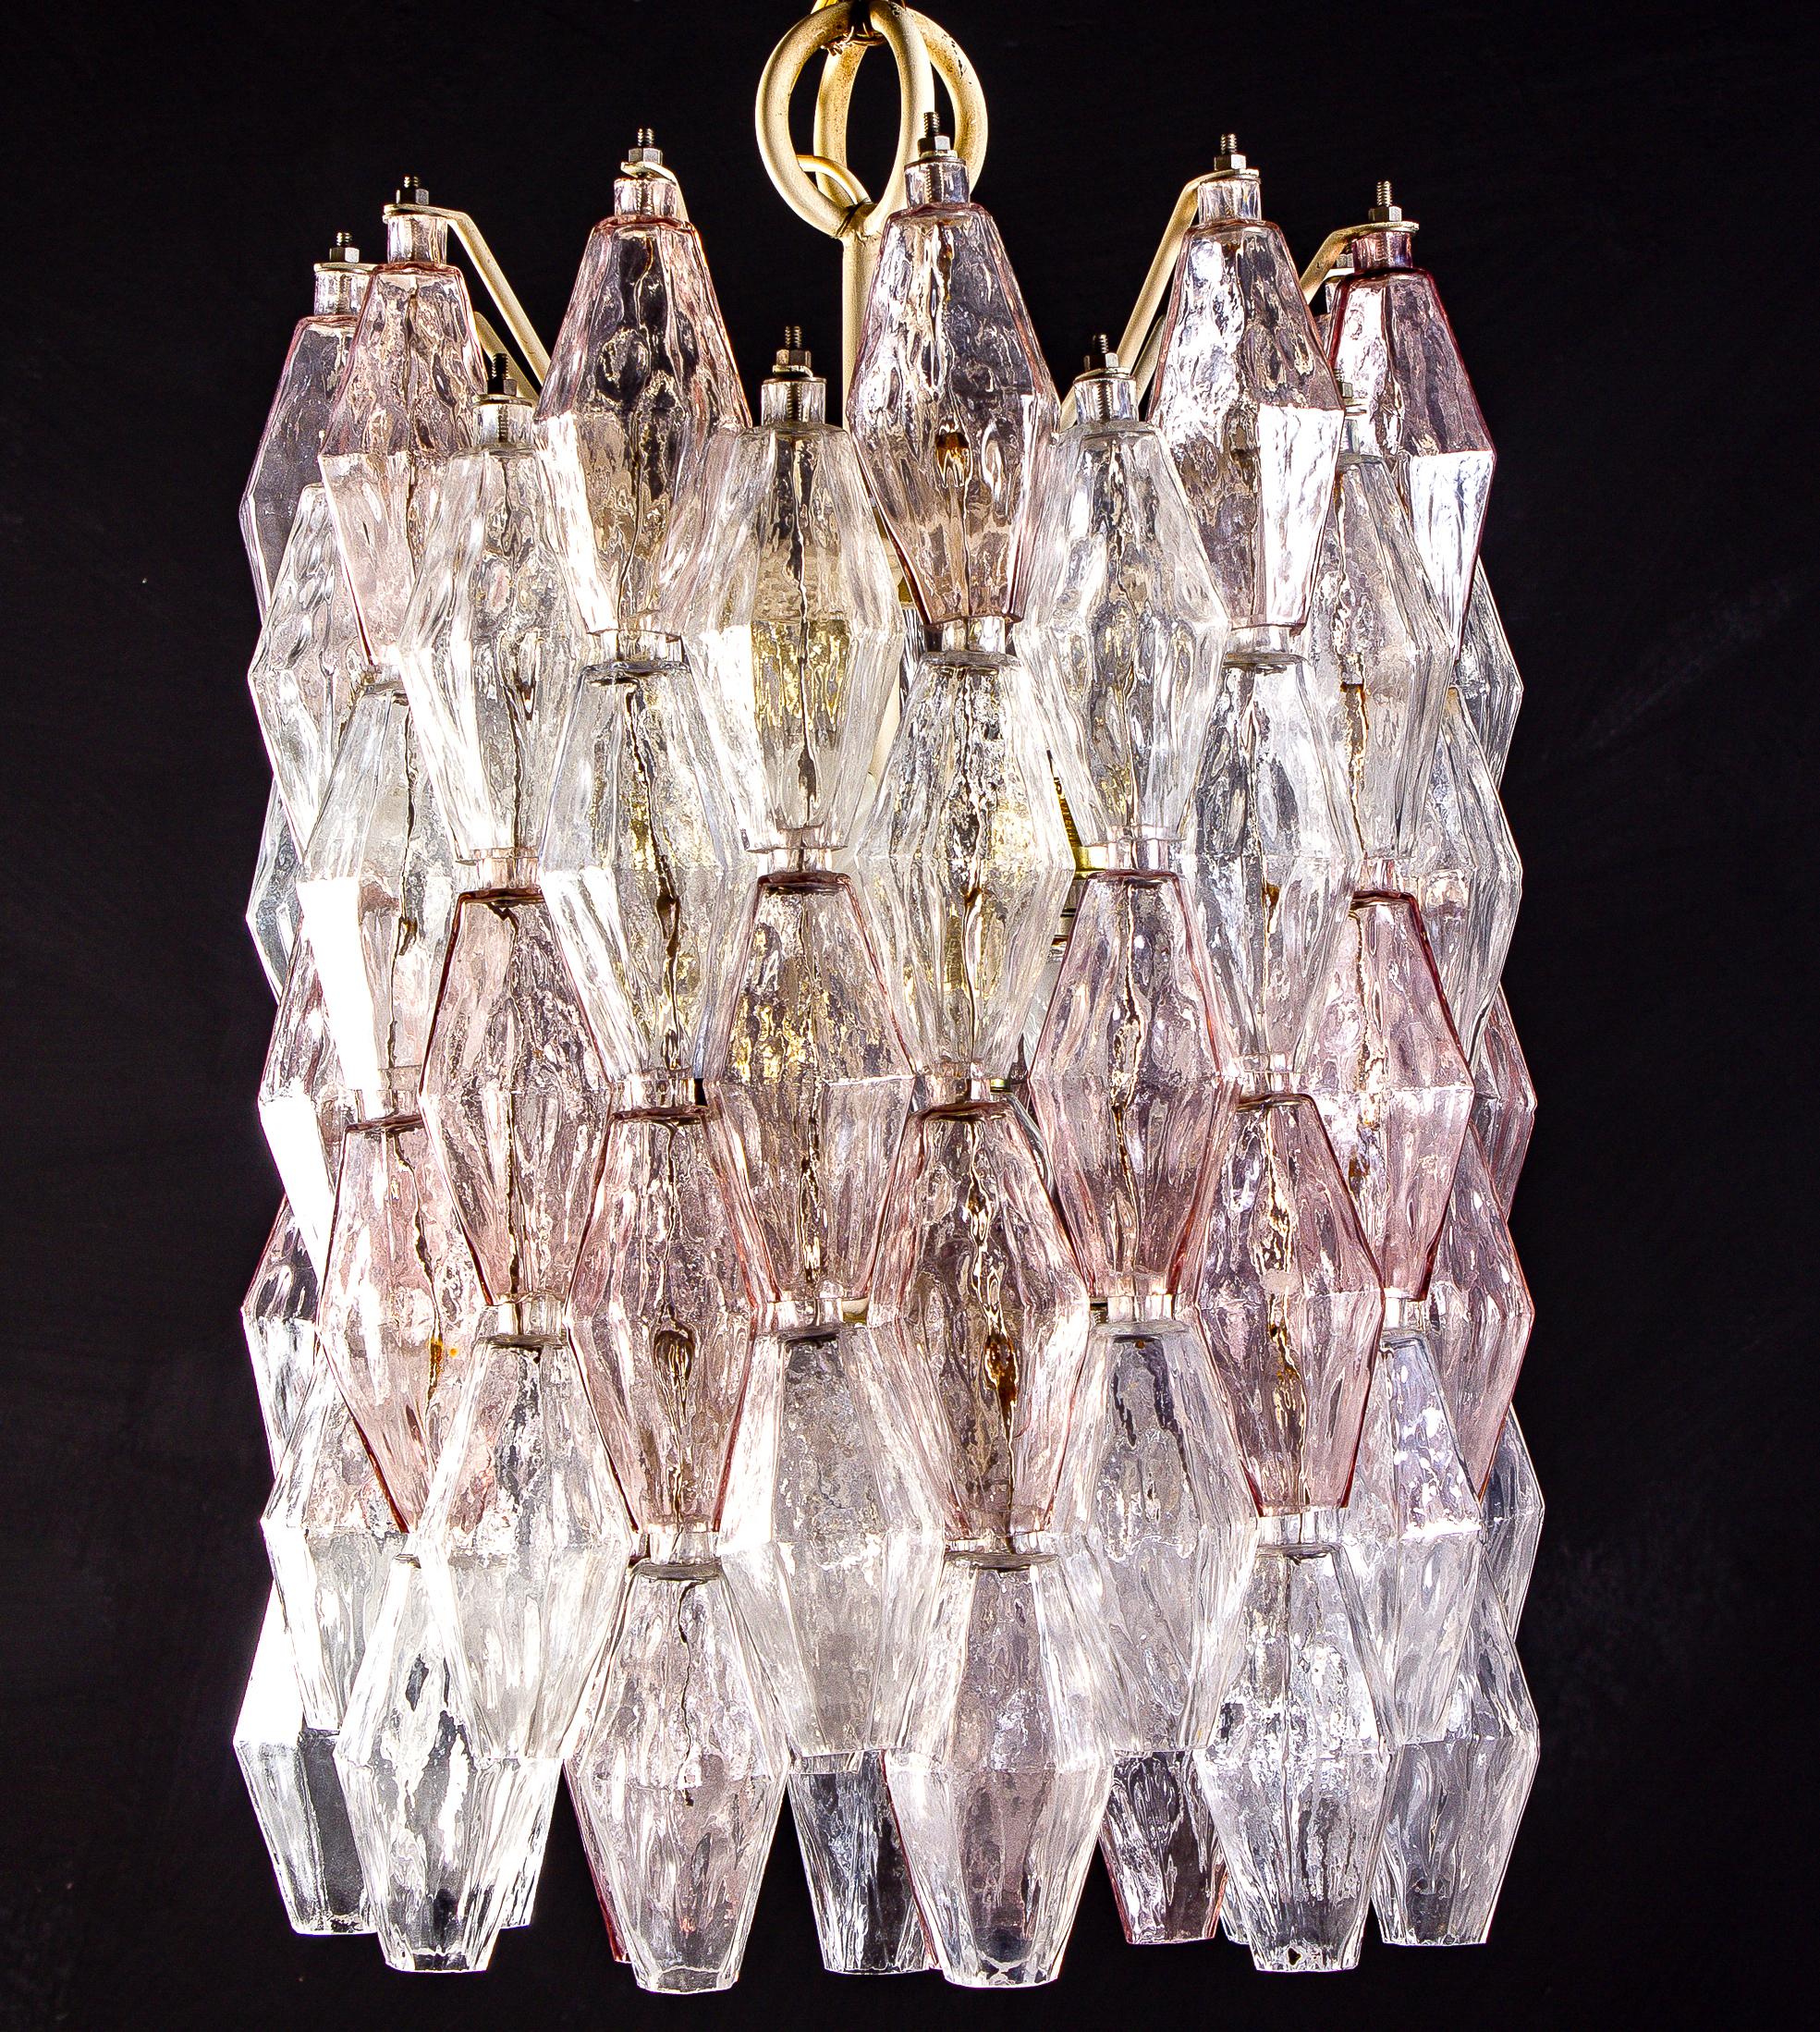 Fabulous original Venini Poliedri chandelier by Carlo Scarpa. Rare combination of light pink and Ice colored Murano glass.
Ivory painted frame in very good original condition.
 